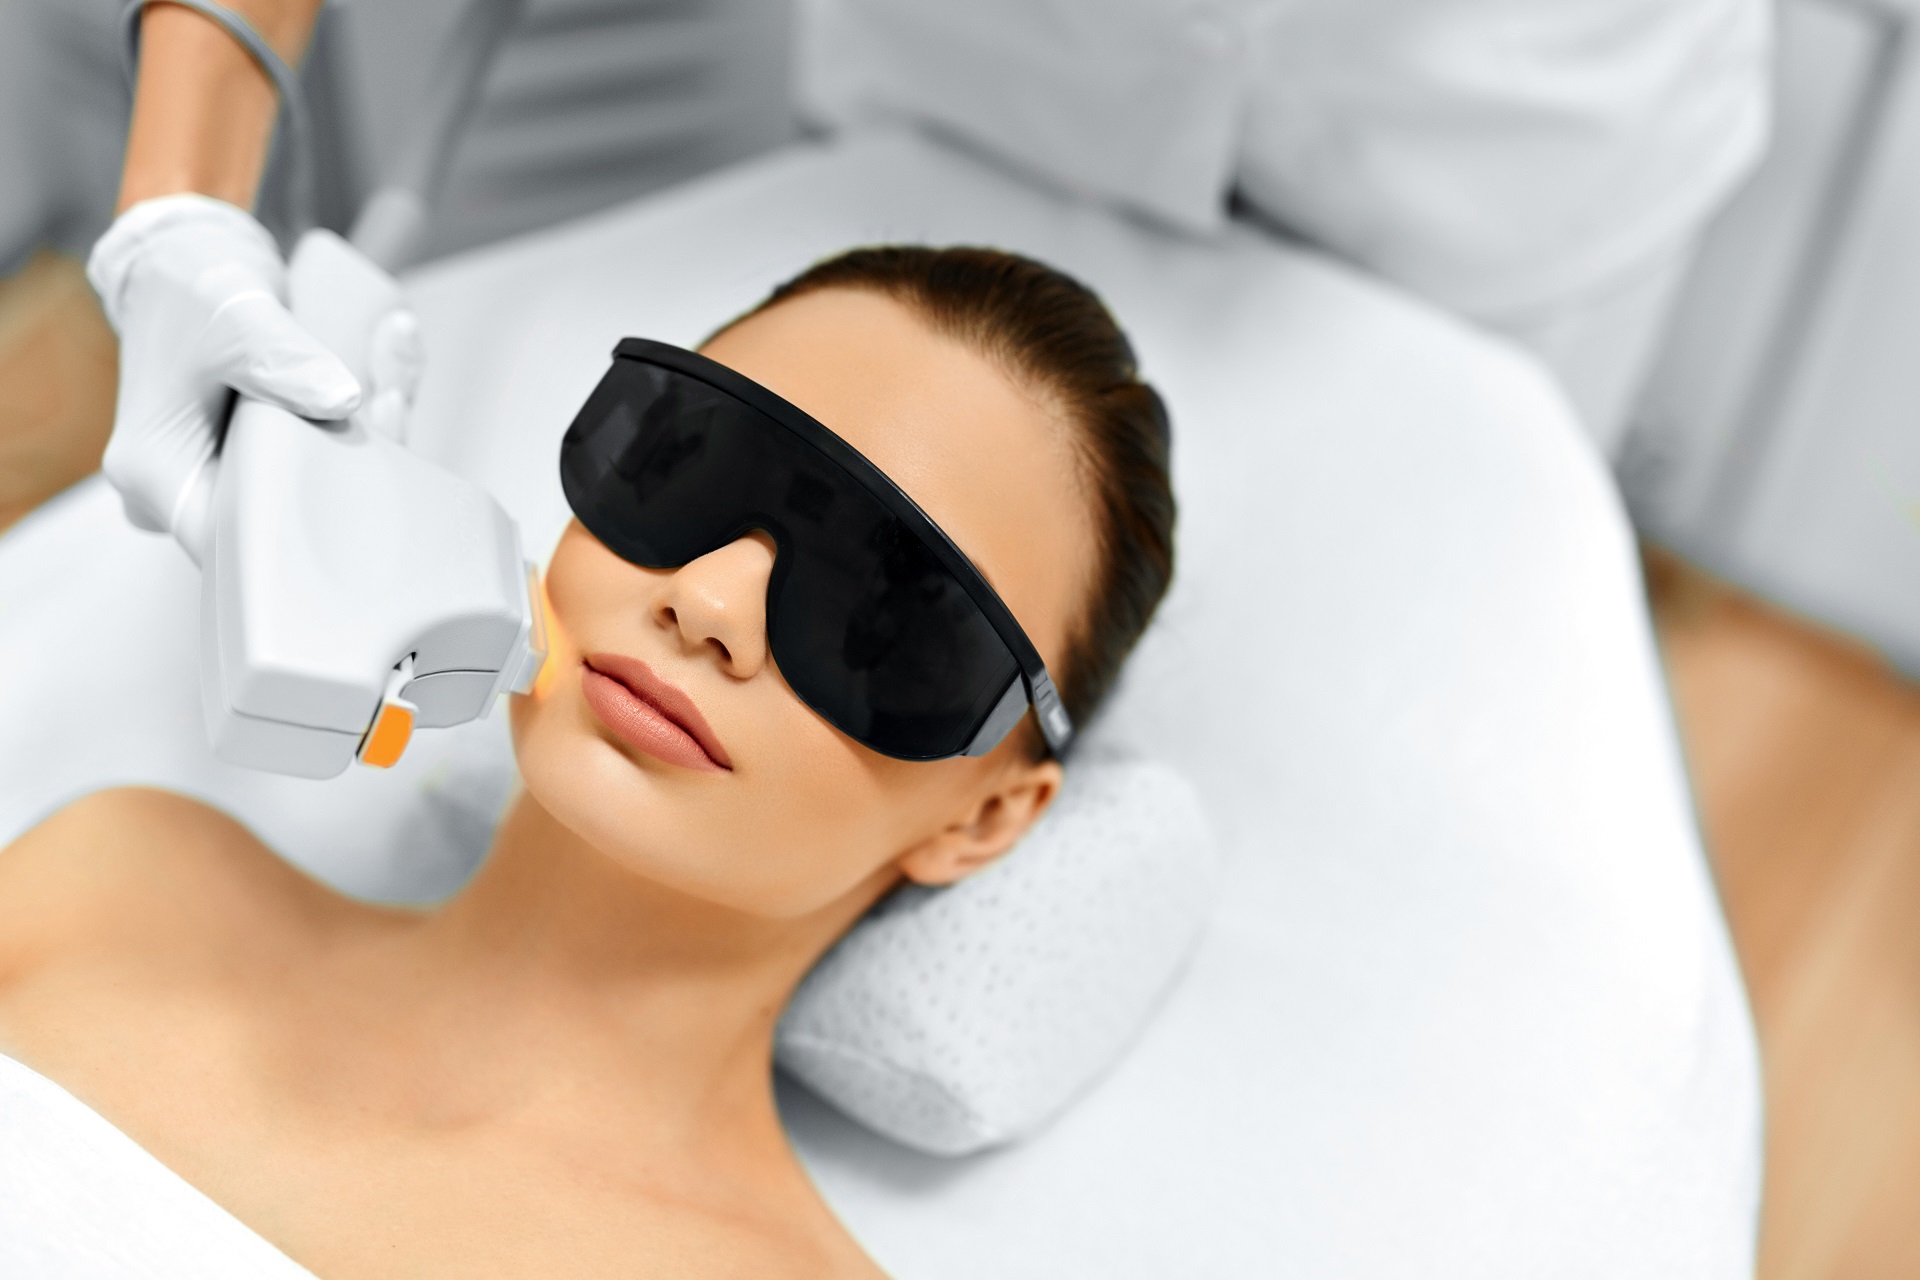 Skin Care Face Beauty Treatment IPL, Photo Facial Therapy | Hudson PT Premier Physical Therapy Clinic Union City and Jersey City, NJ,